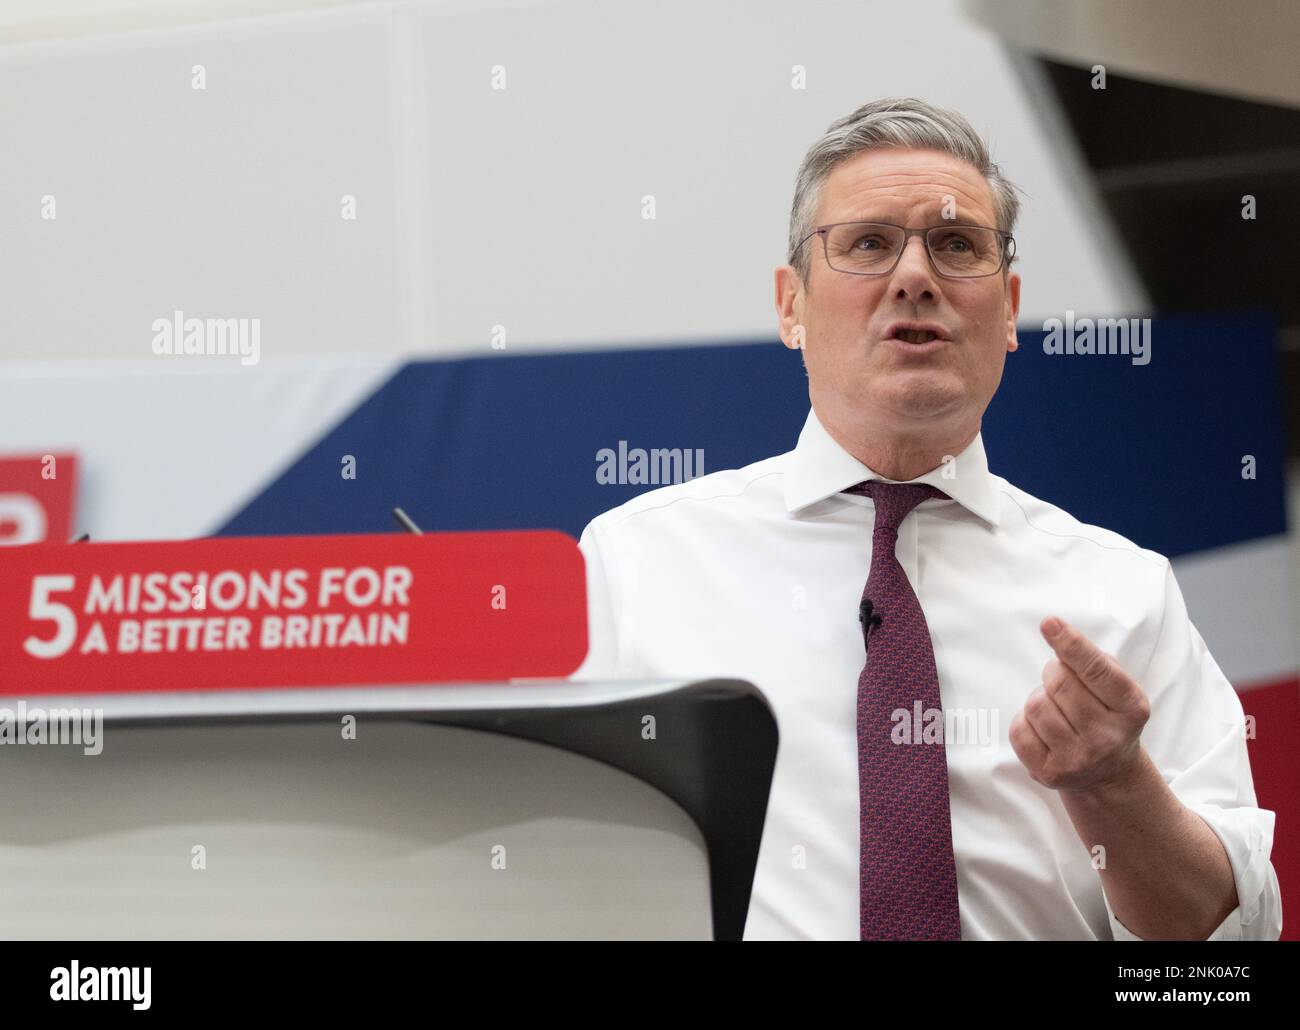 Manchester, UK. February 23rd, 2023.  Keir Starmer launches five bold missions for a better Britain at 1 Angel Square, Manchester UK. The Labour leader spoke in front of shadow cabinet colleagues and Manchester based politicians. He outlined the purpose of missions as. “It means providing a clear set of priorities. A relentless focus on the things that matter most.” Picture: garyroberts/worldwidefeatures.com/Alamy Live News Stock Photo